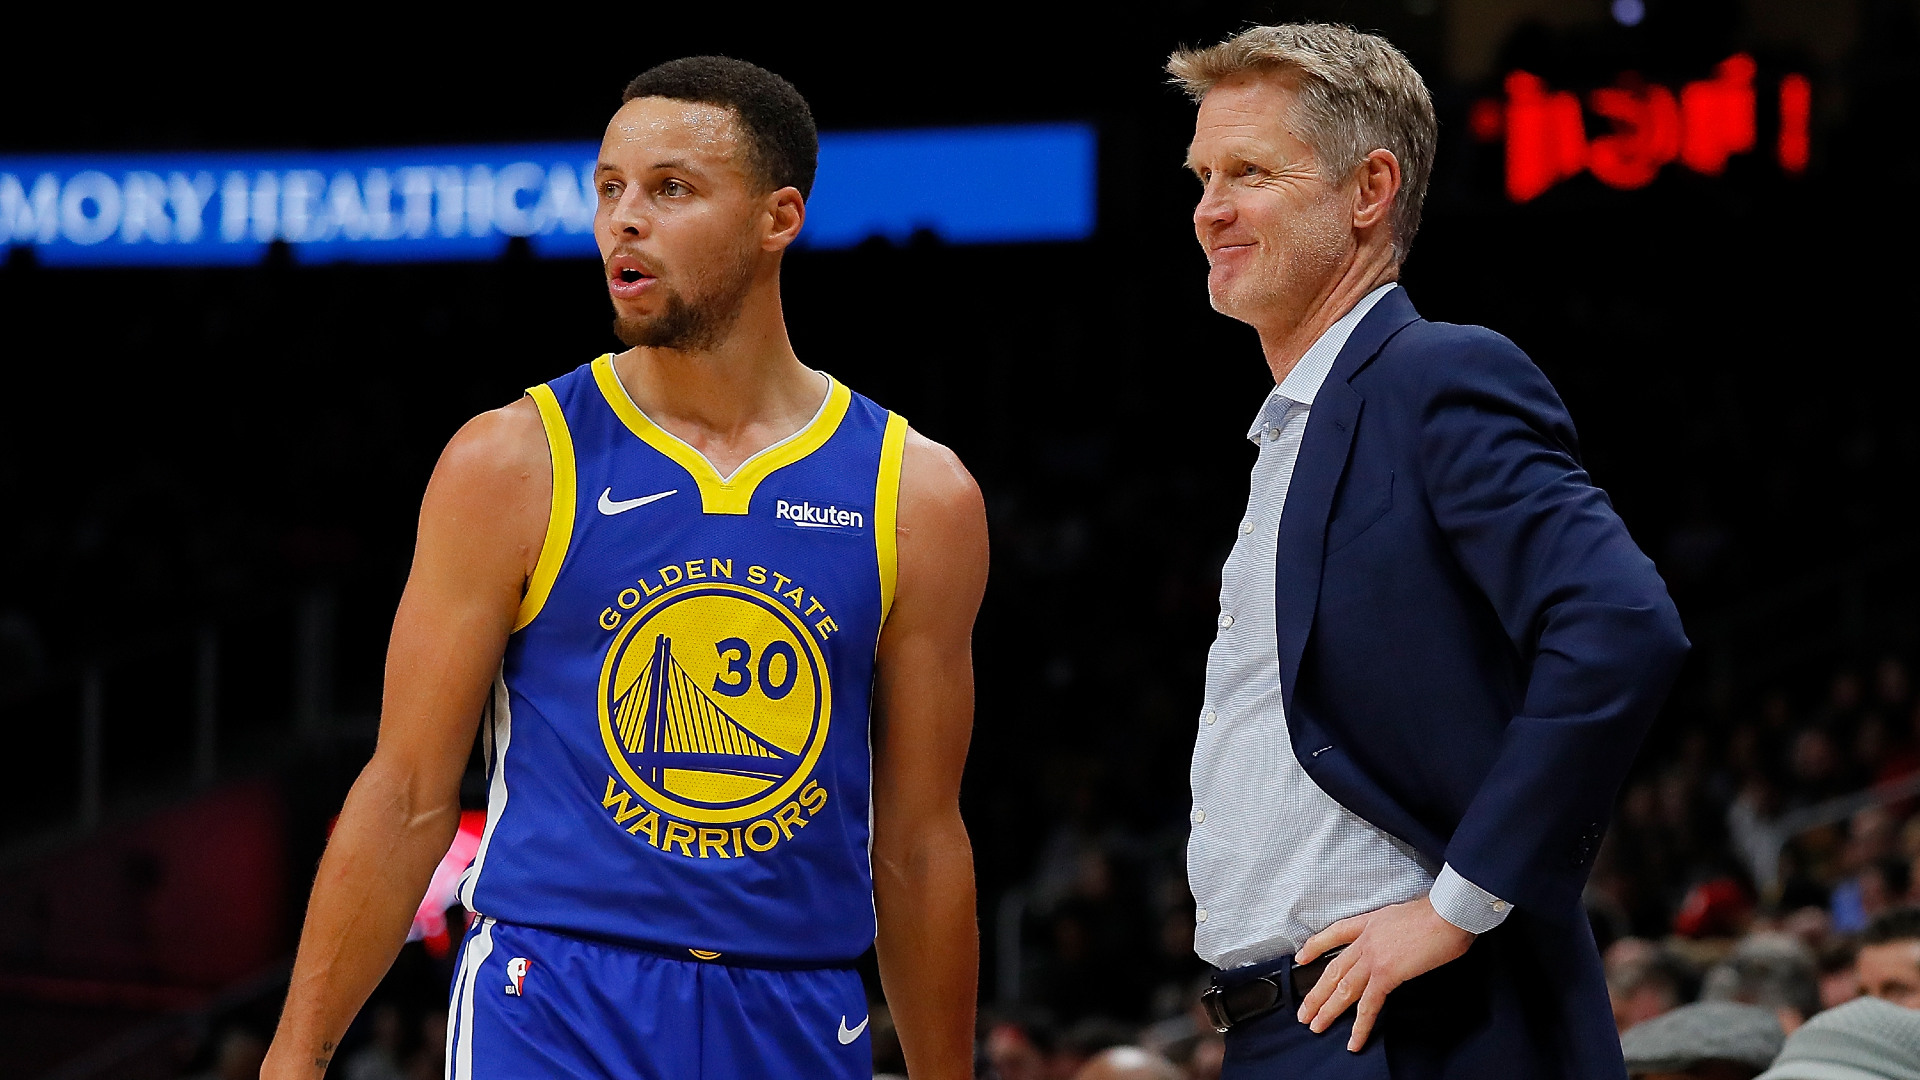 Stephen Curry has done it all but his Golden State Warriors head coach Steve Kerr says Olympic gold is the only thing that eludes him.